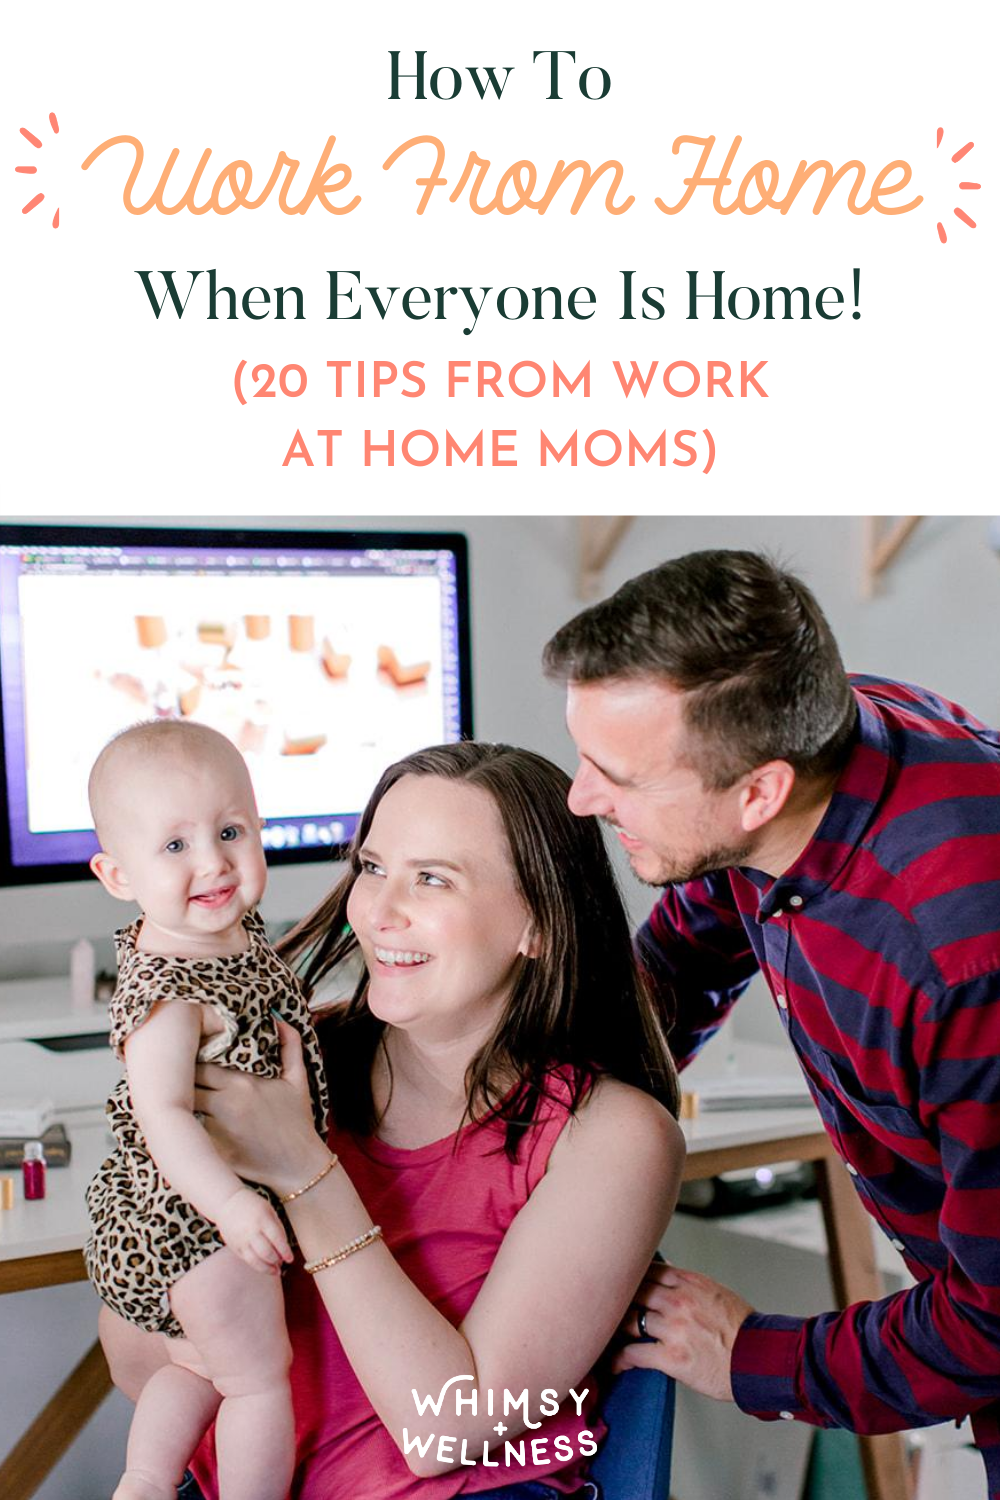 How to work from home when everyone is home (20 tips from work at home moms)